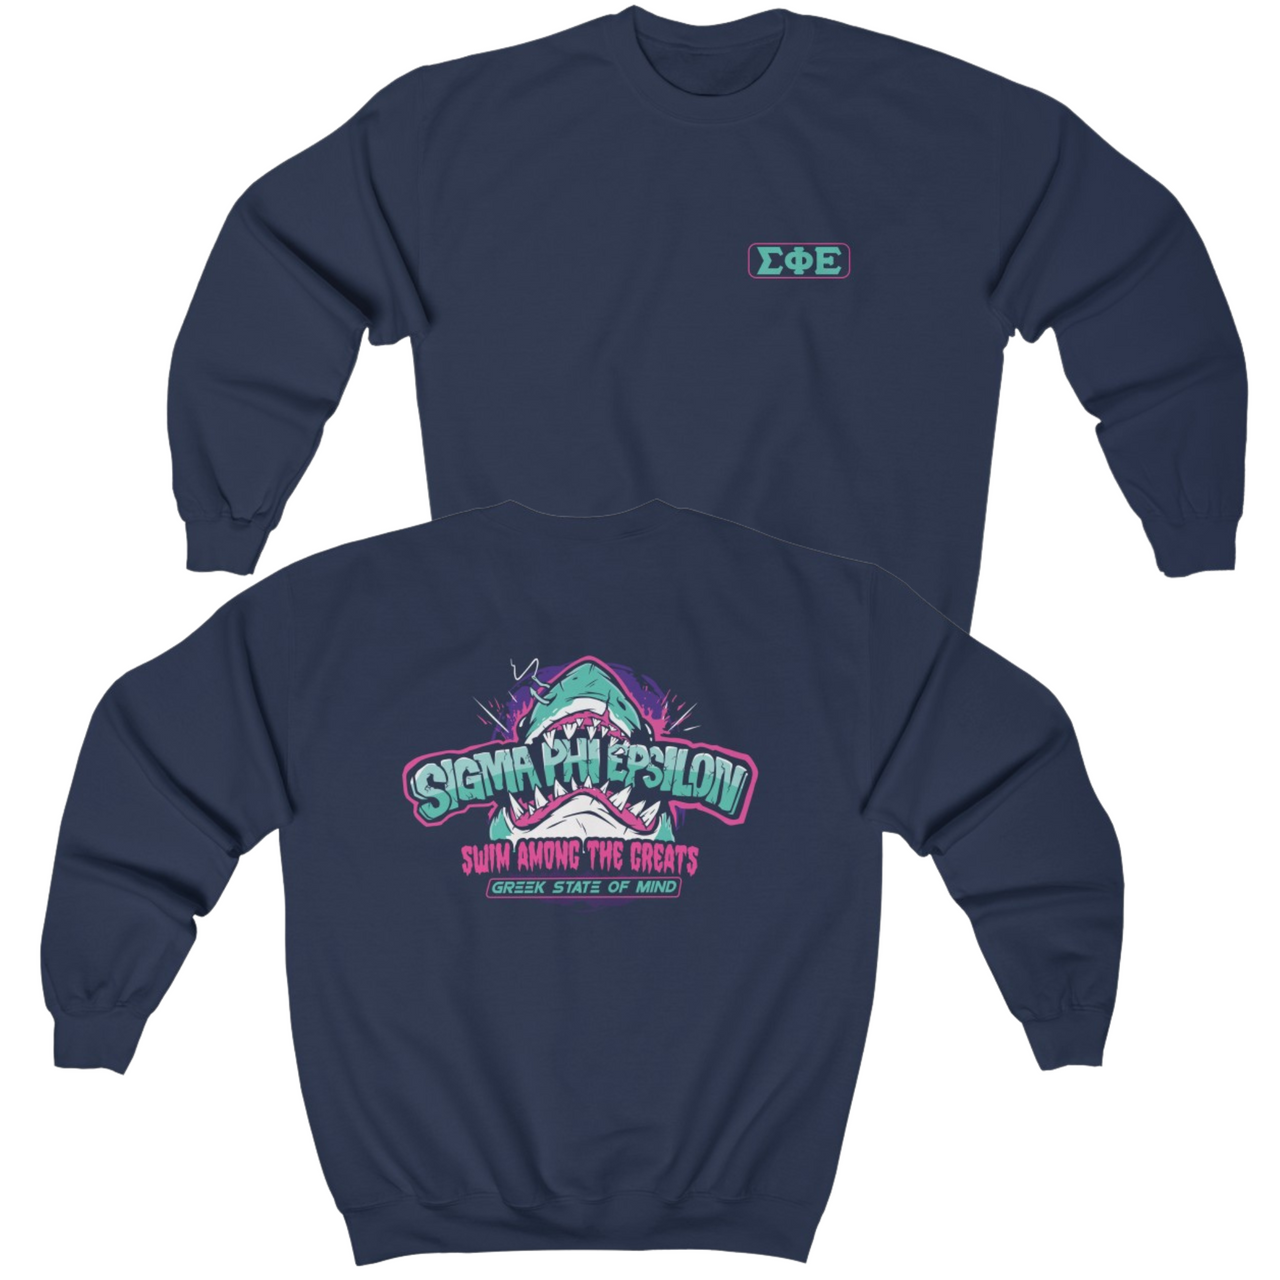 navy Sigma Phi Epsilon Graphic Crewneck Sweatshirt | The Deep End | SigEp Fraternity Clothes and Merchandise